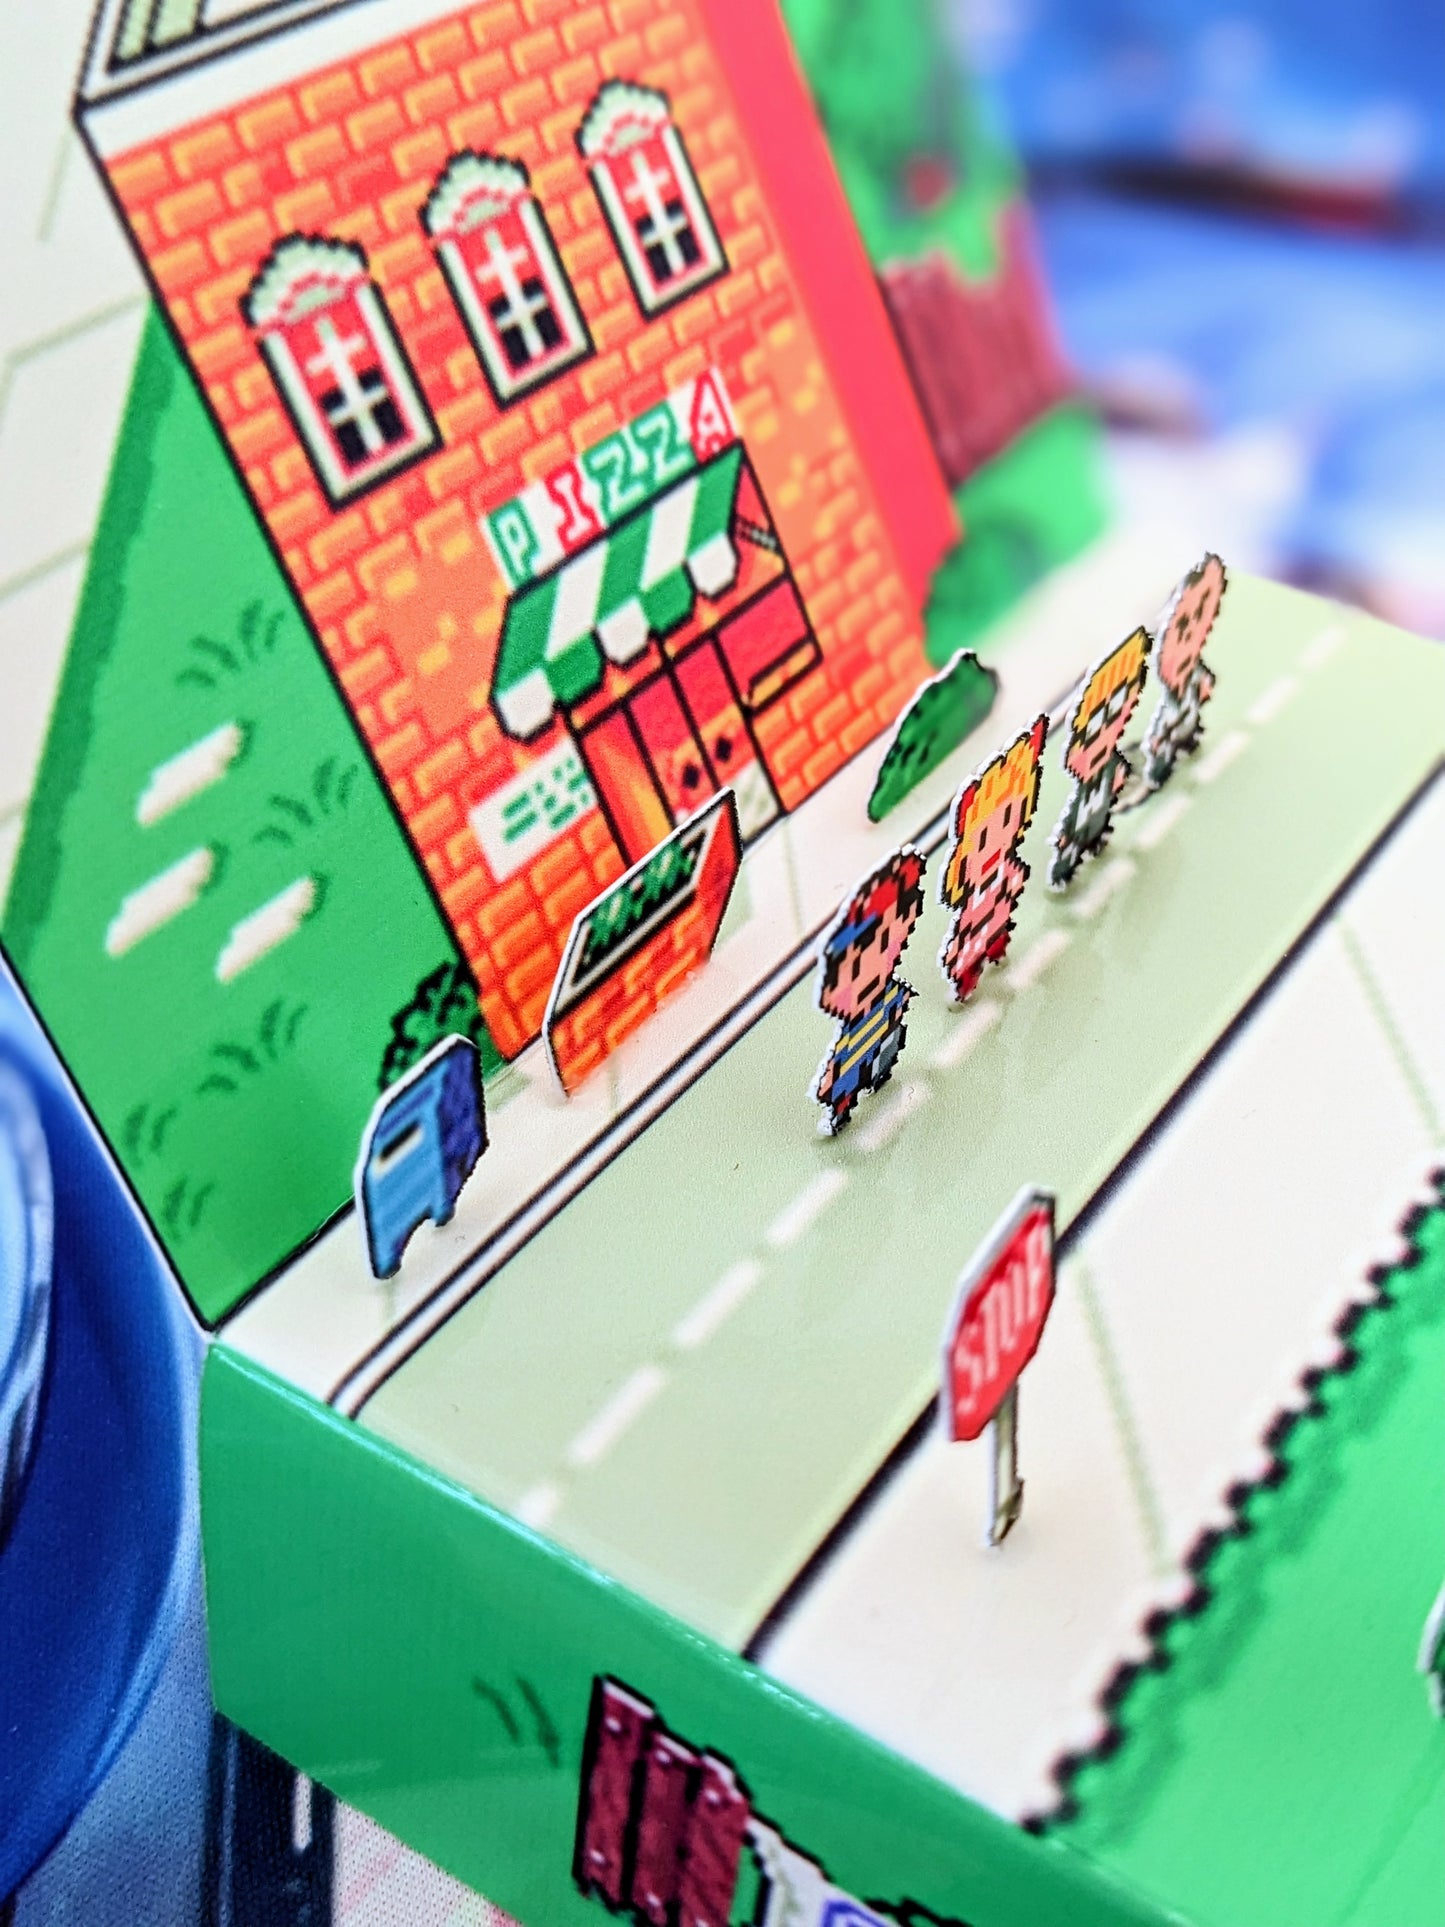 Earthbound Pizza place Onett 3D cube diorama